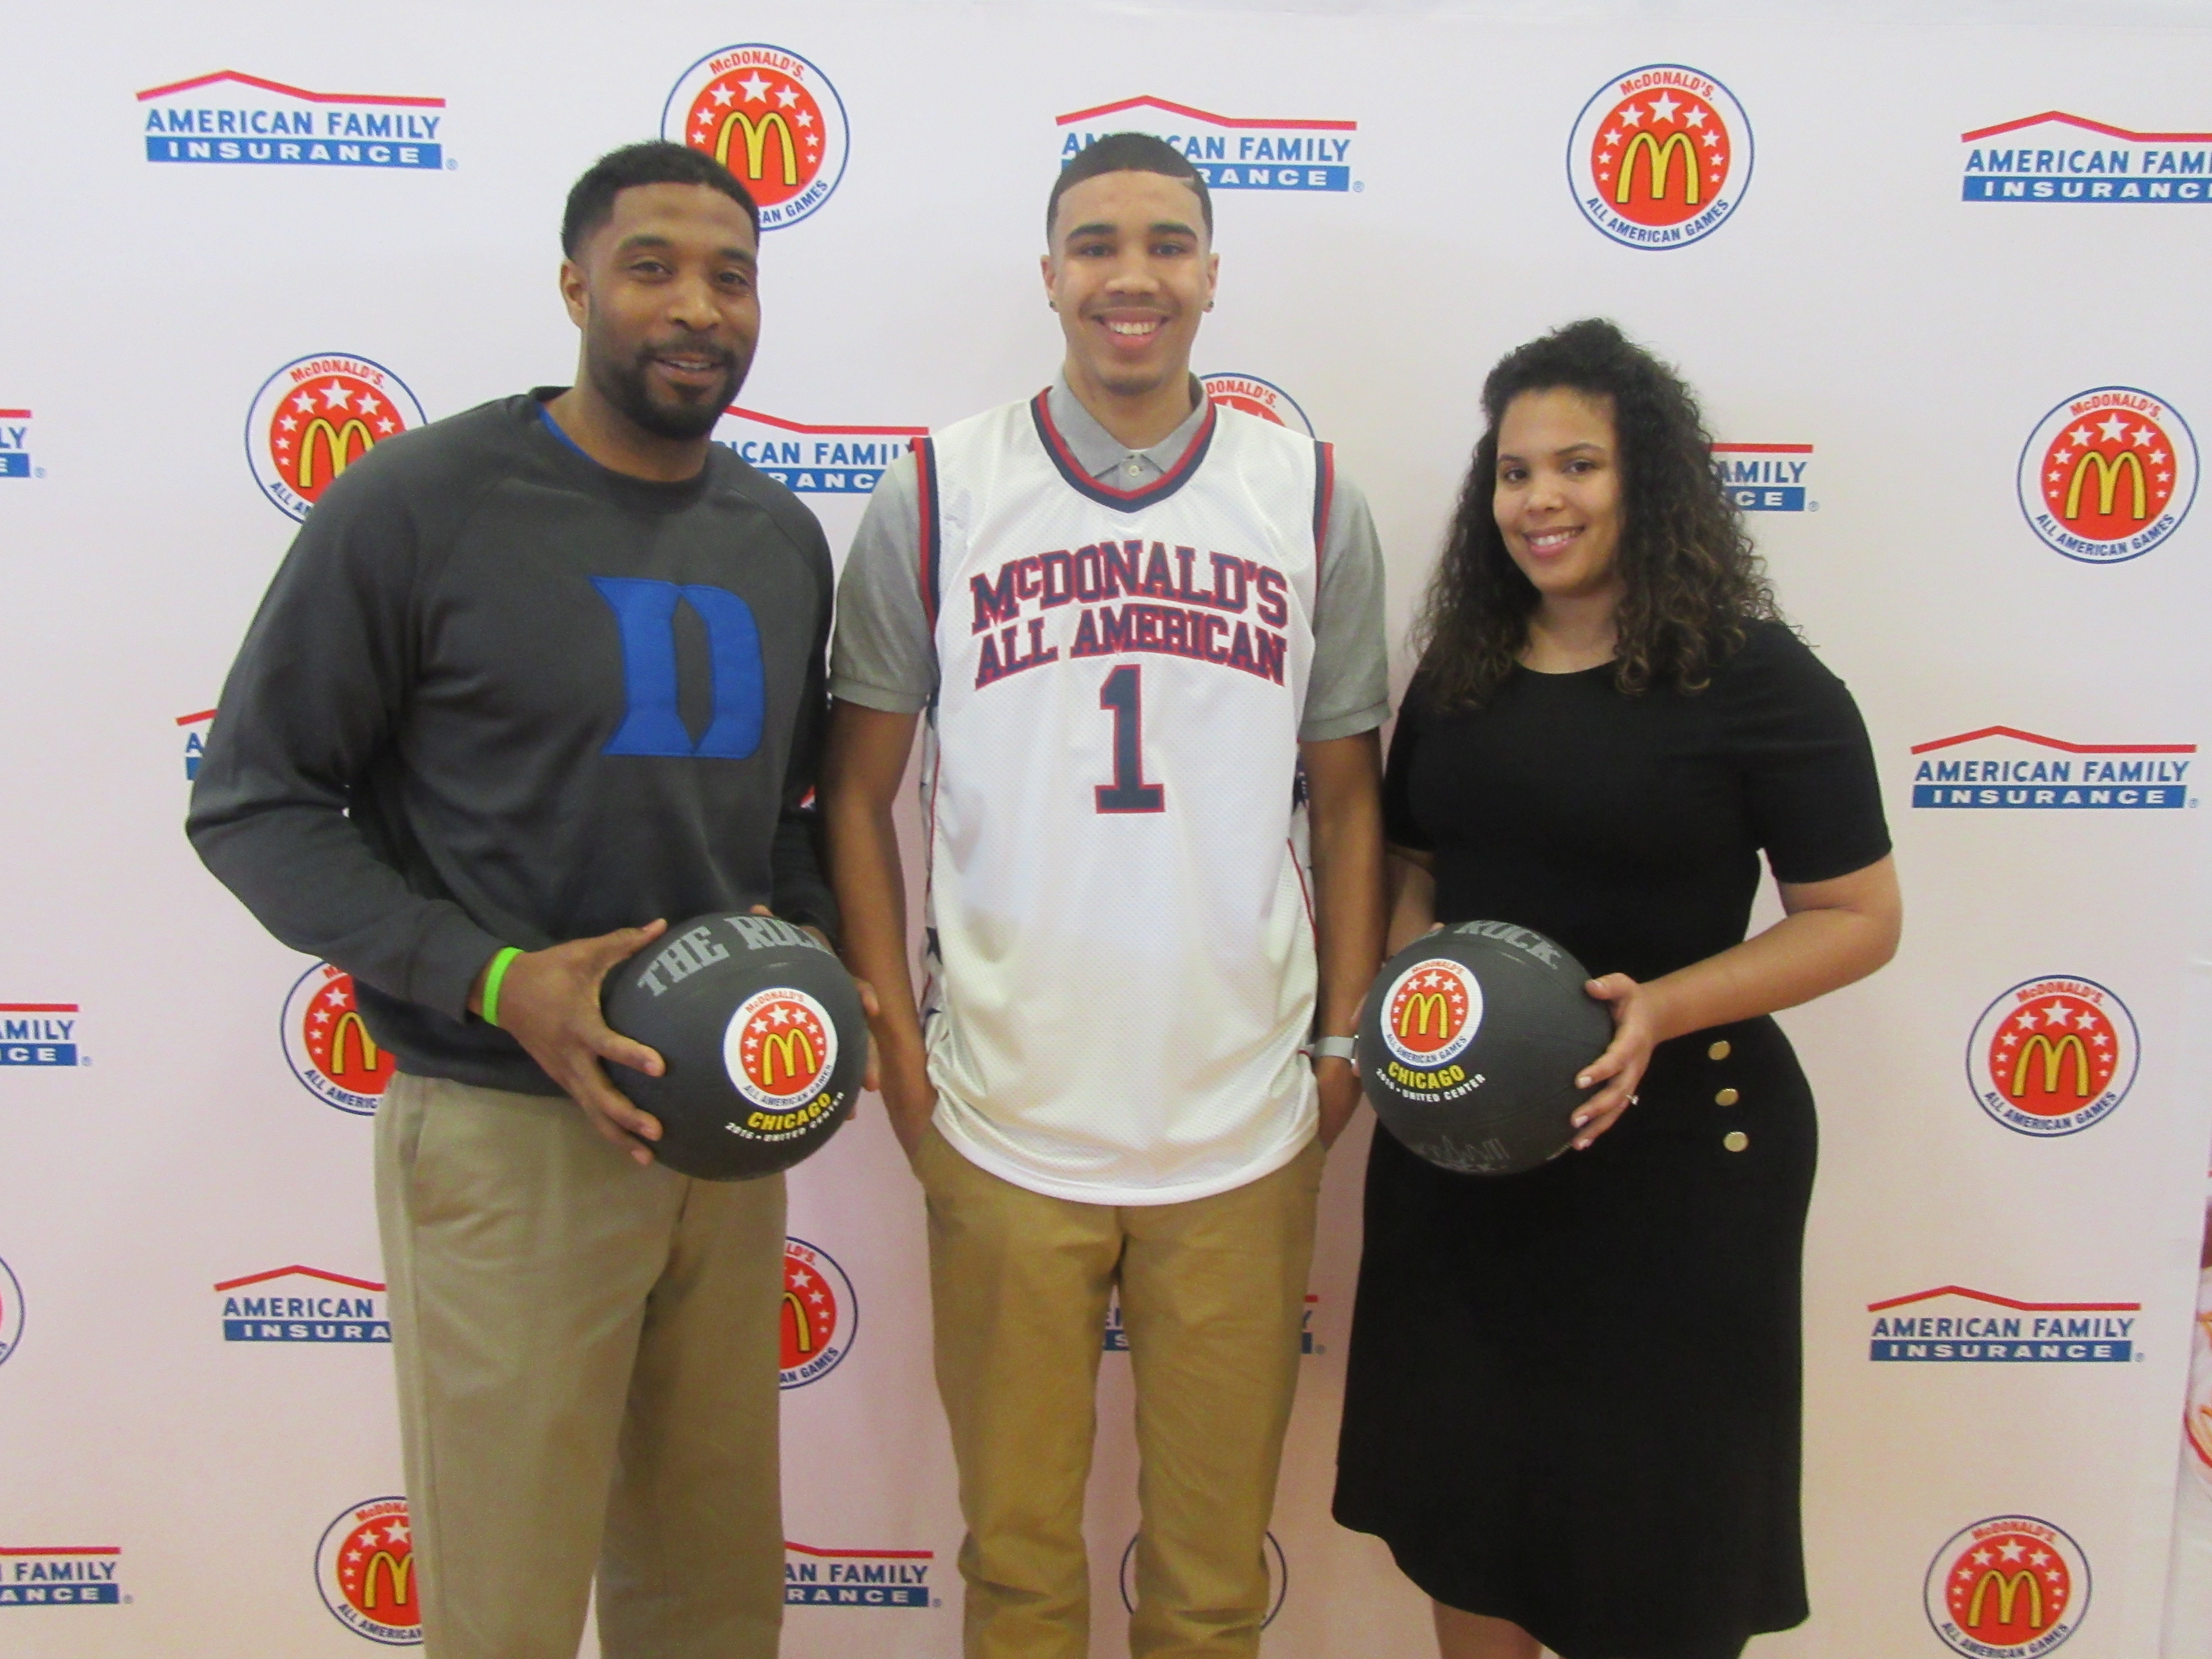 Duke-bound Jayson Tatum honored to wear same jersey as McDonald's All  American greats